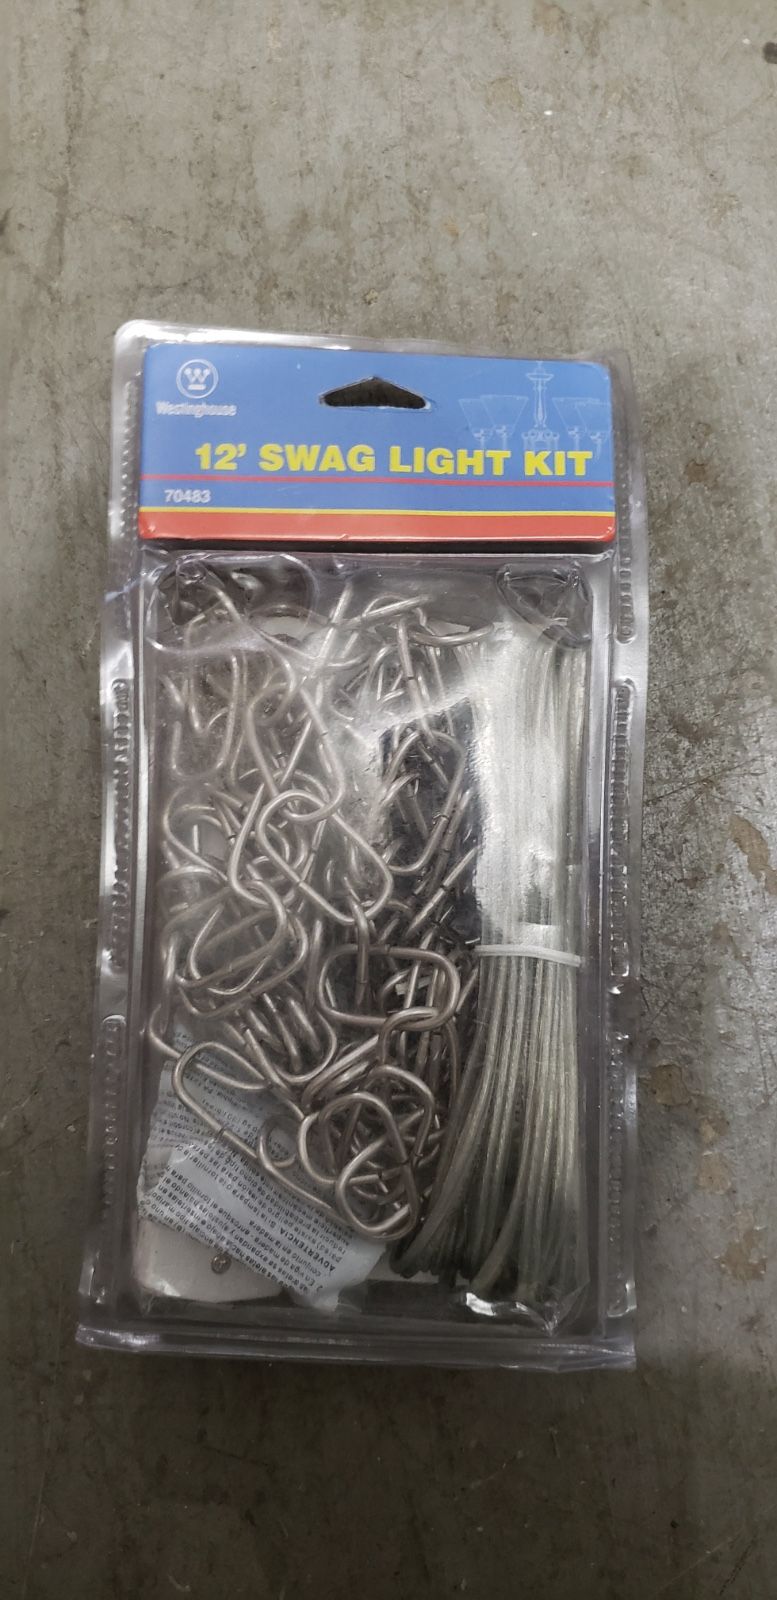 12 foot light fixture swag kit. new never used.